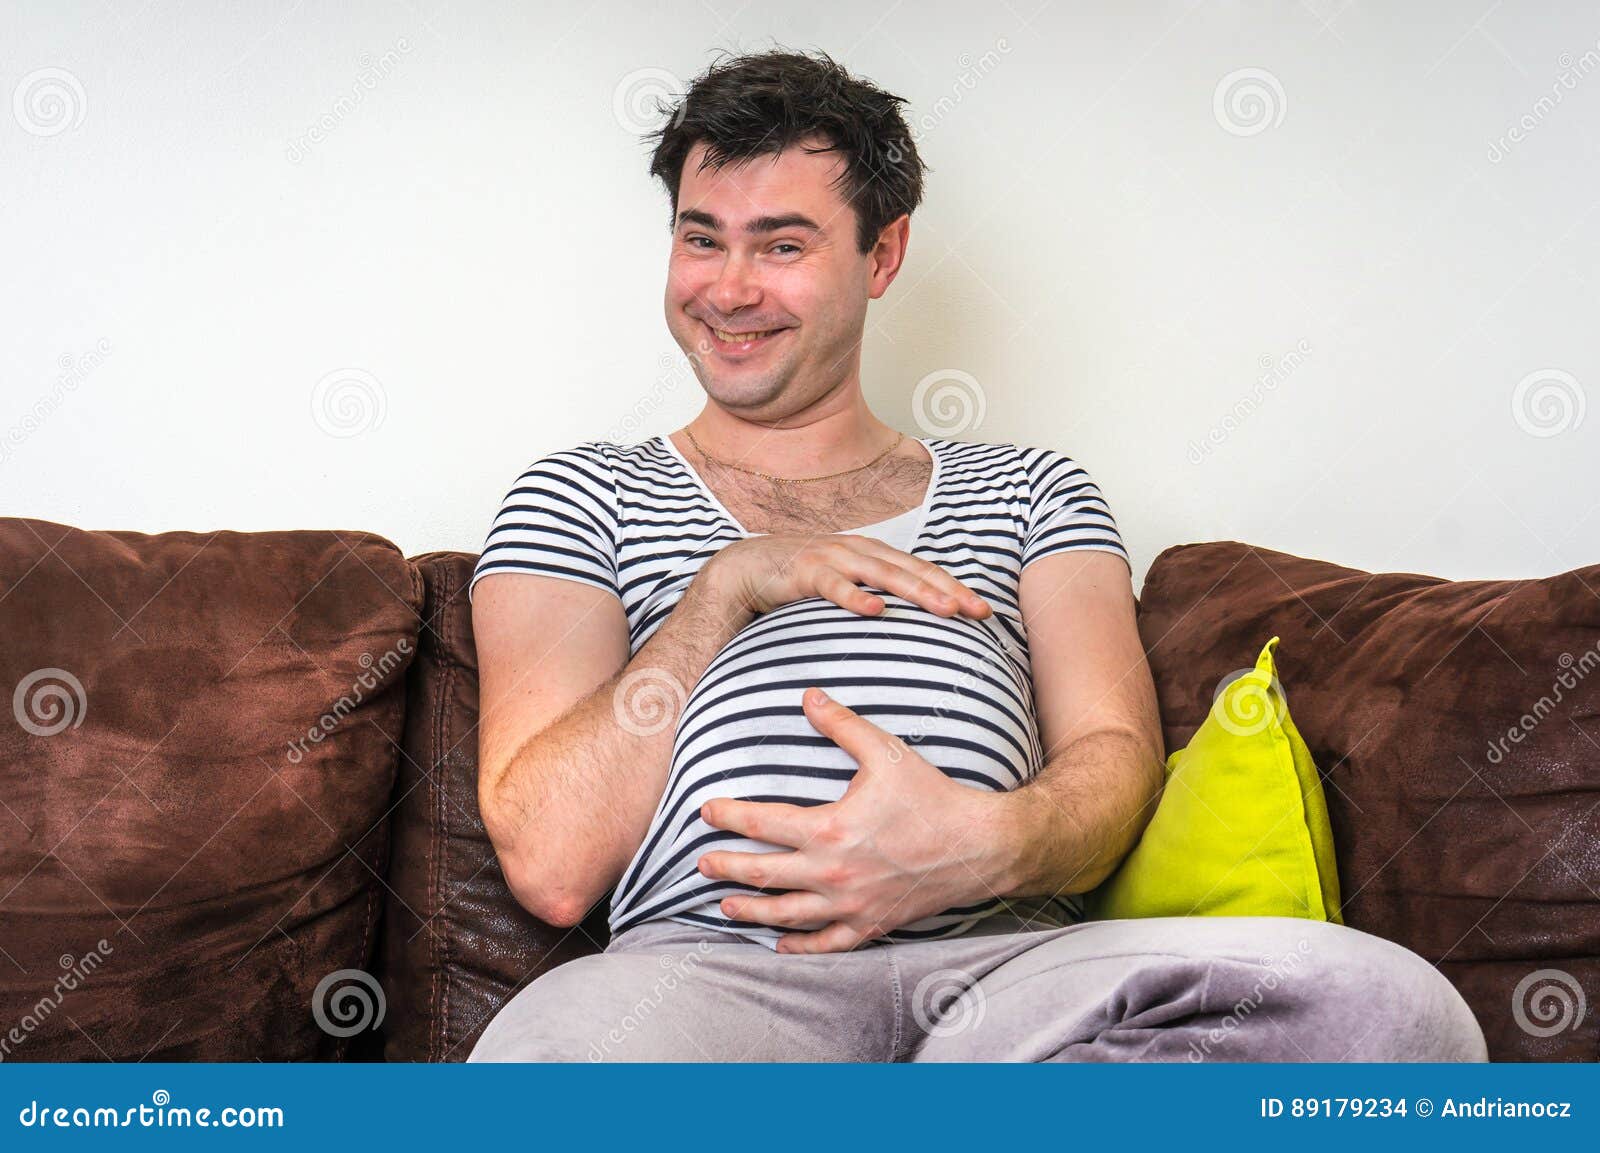 Funny Image of Pregnant Man with Pregnant Belly Stock Photo - Image of  happiness, modern: 89179234